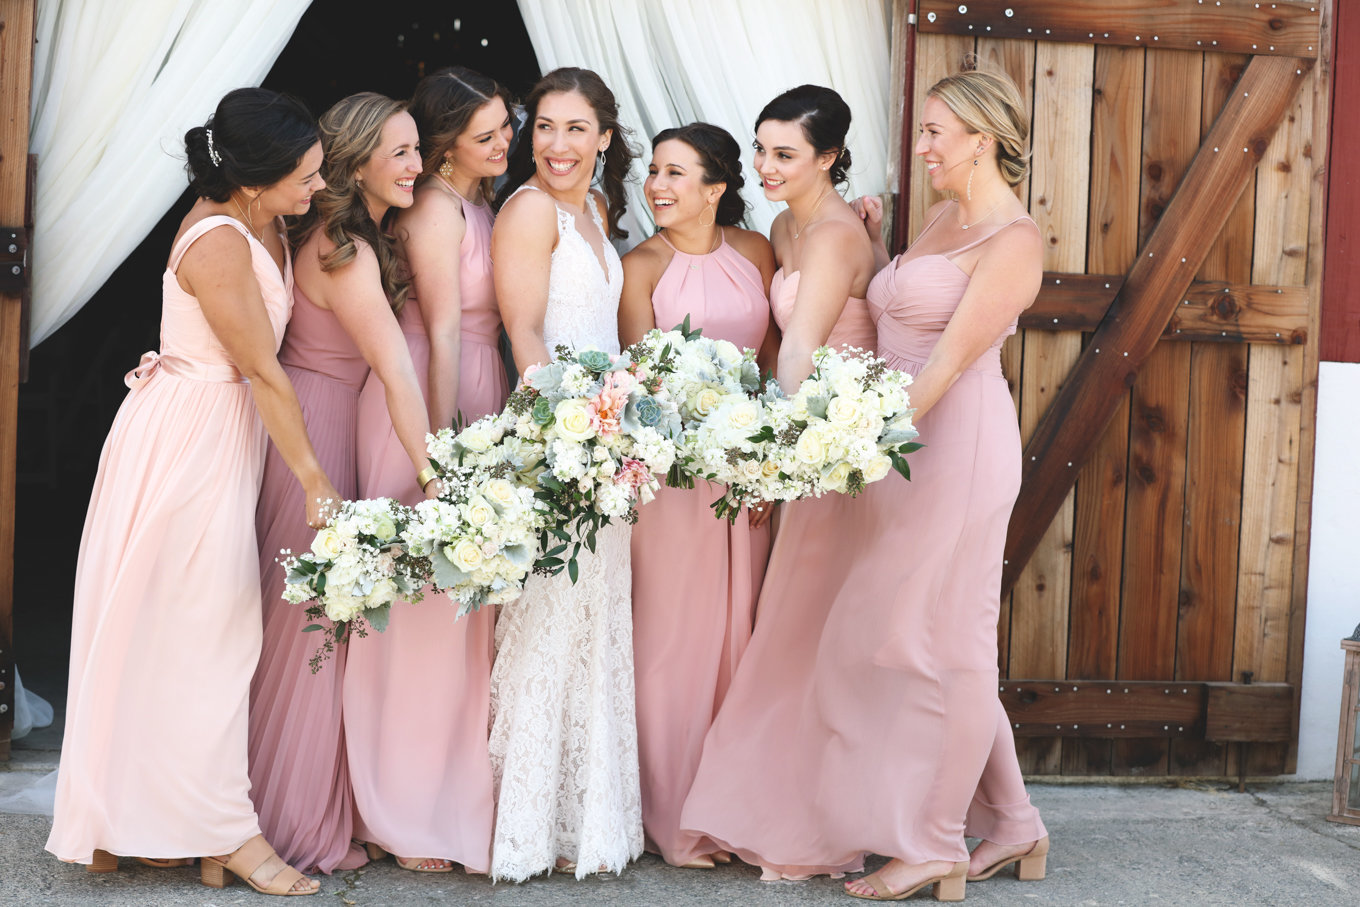 Bridal party at beautiful rustic wedding in northern california